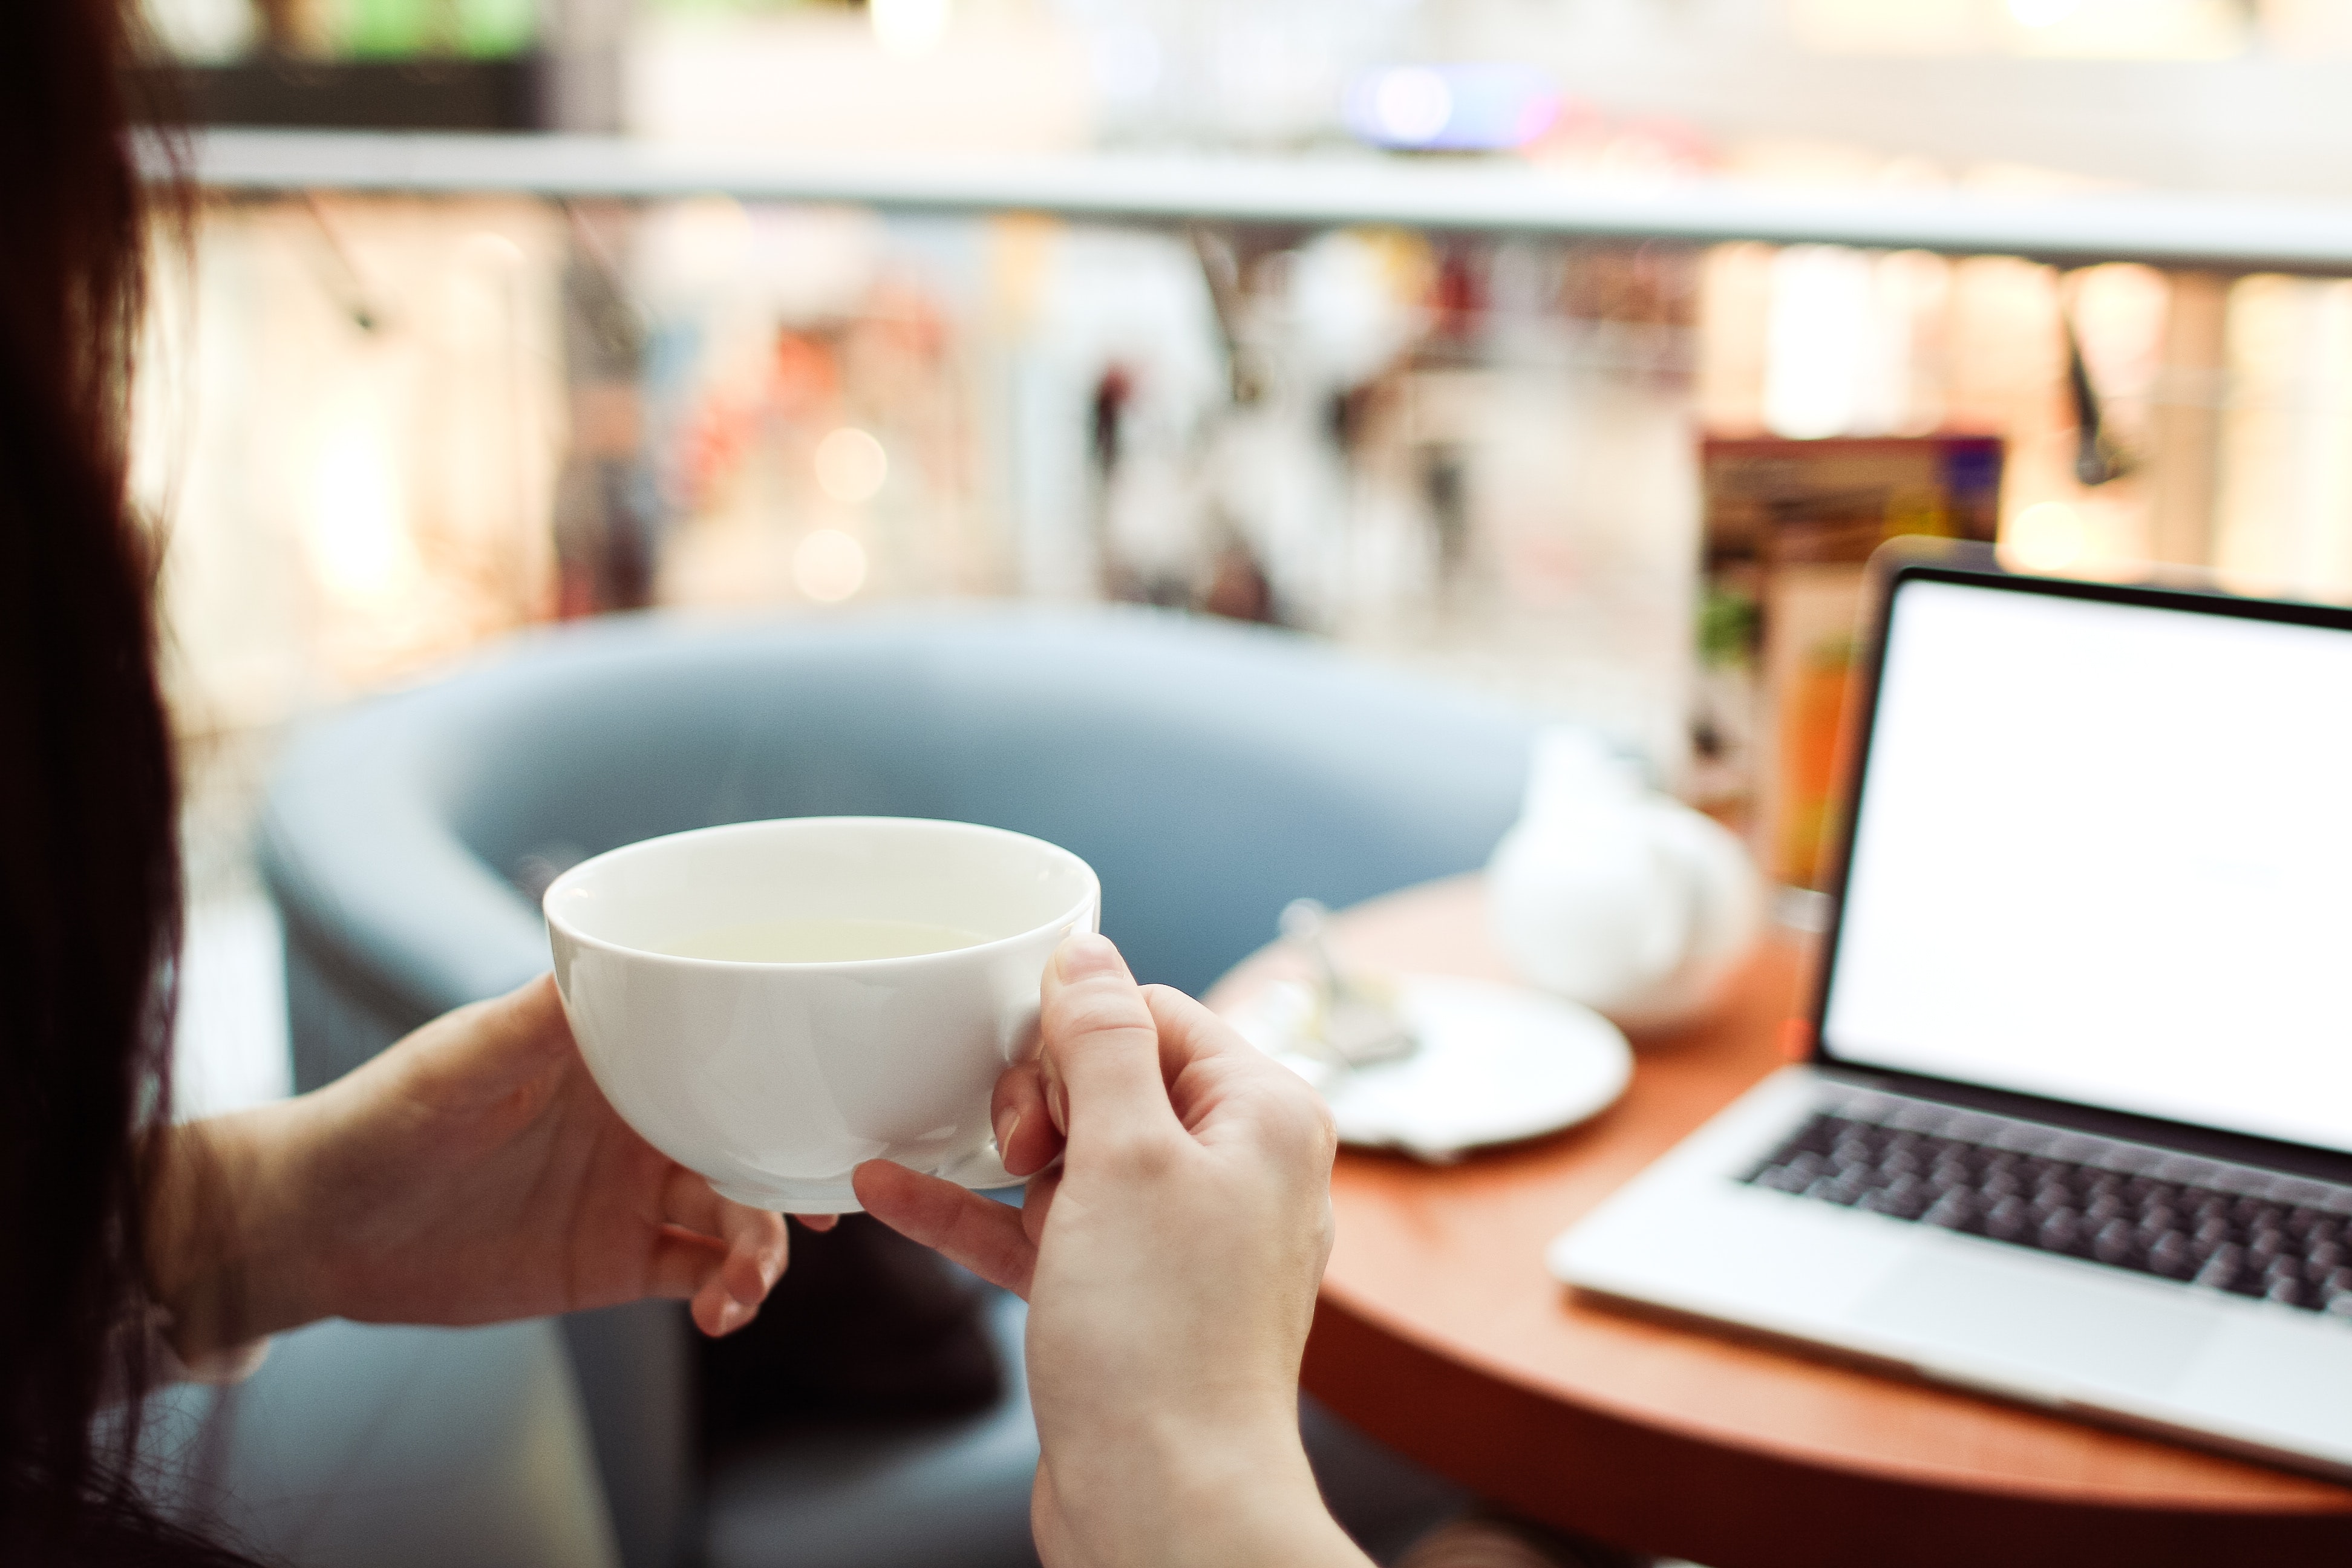 Person holding white ceramic teacup in front of a macbook pro photo